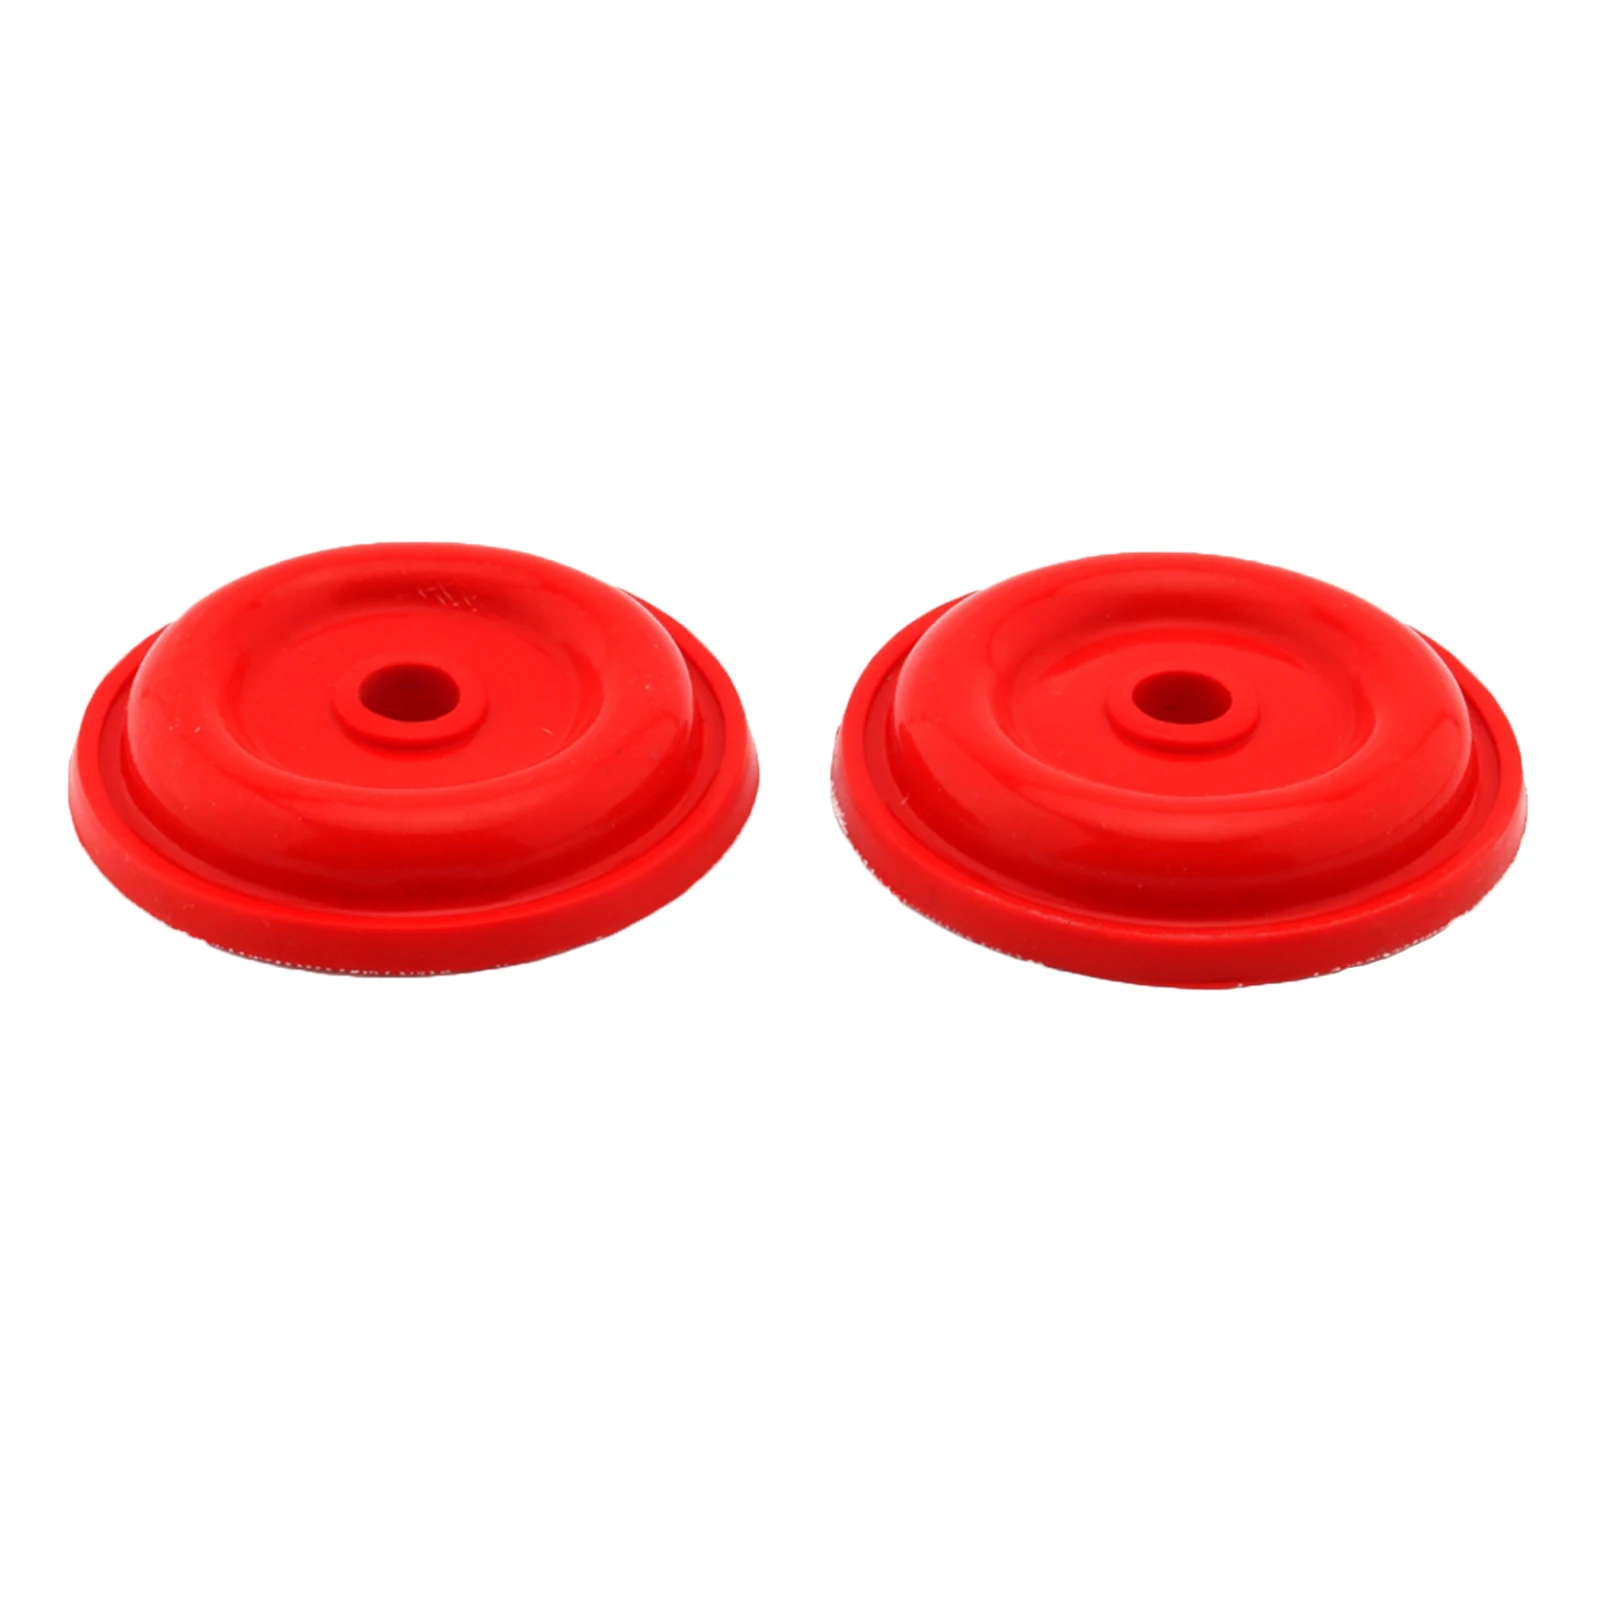 2 Packs Exhaust Valve Bellows Replacements 5412379 for Polaris Snowmobiles 440 to 900 Boat Accessories Red